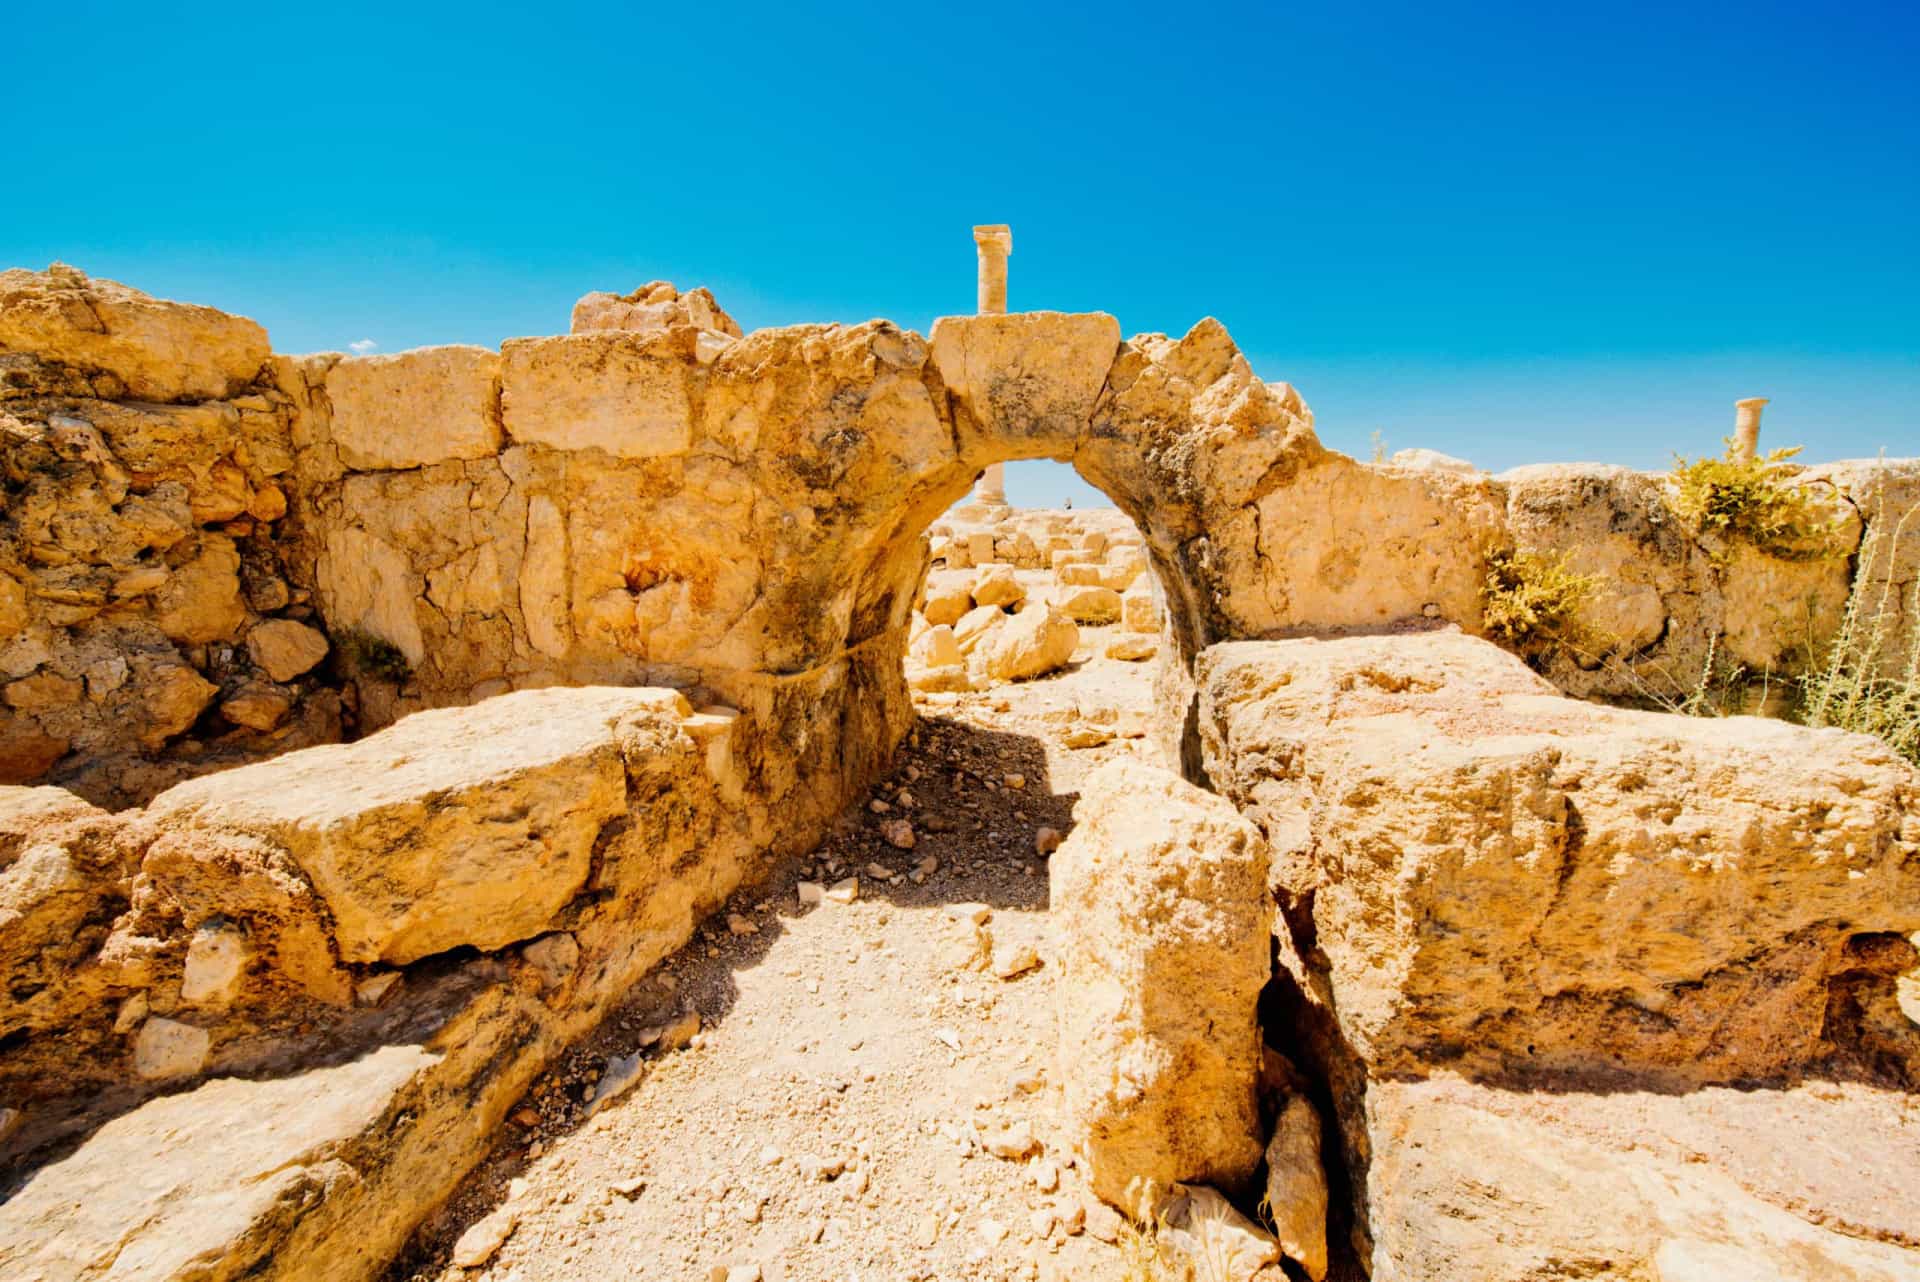 <p>Machaerus, an ancient hilltop palace and fortress located southwest of Madaba, Jordan, once served as a military base for King Herod the Great. The Bible (and Jewish historian Flavius Josephus) identified the desert stronghold as the site where John the Baptist was imprisoned and executed on the orders of the king's son, Herod Antipas.</p>